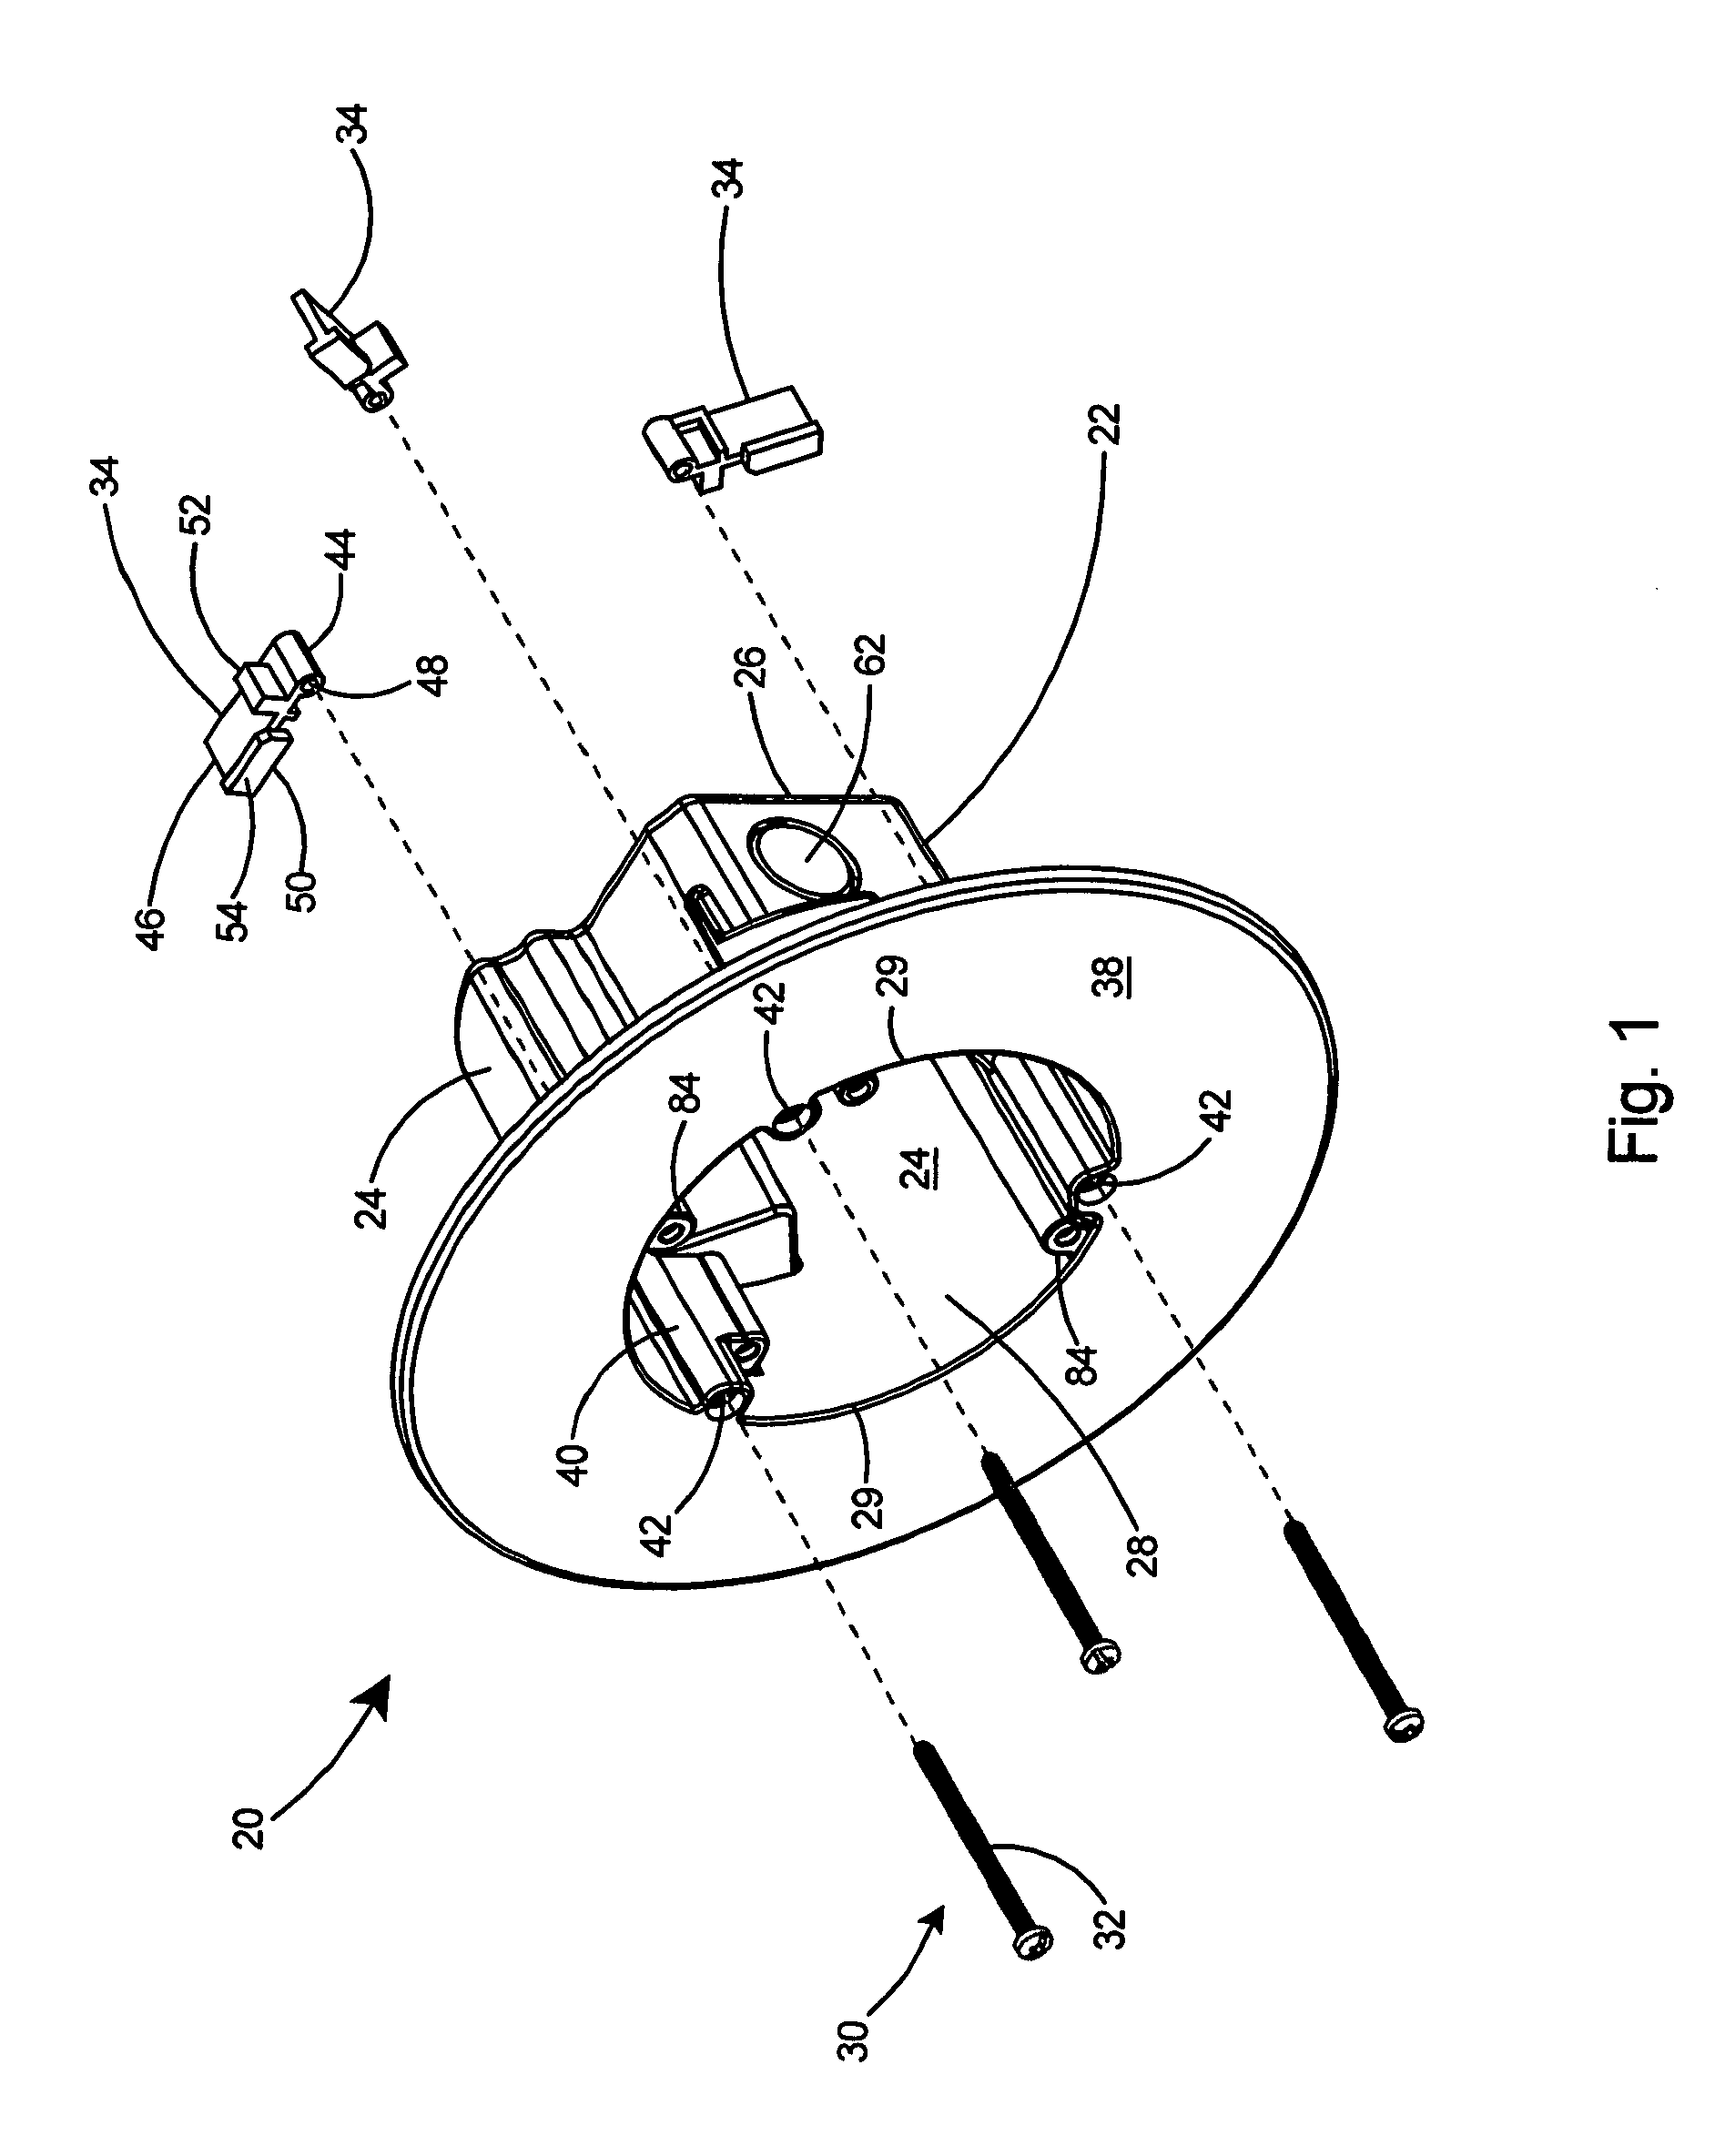 Electrical box assembly for mounting and supporting a security camera or fixture